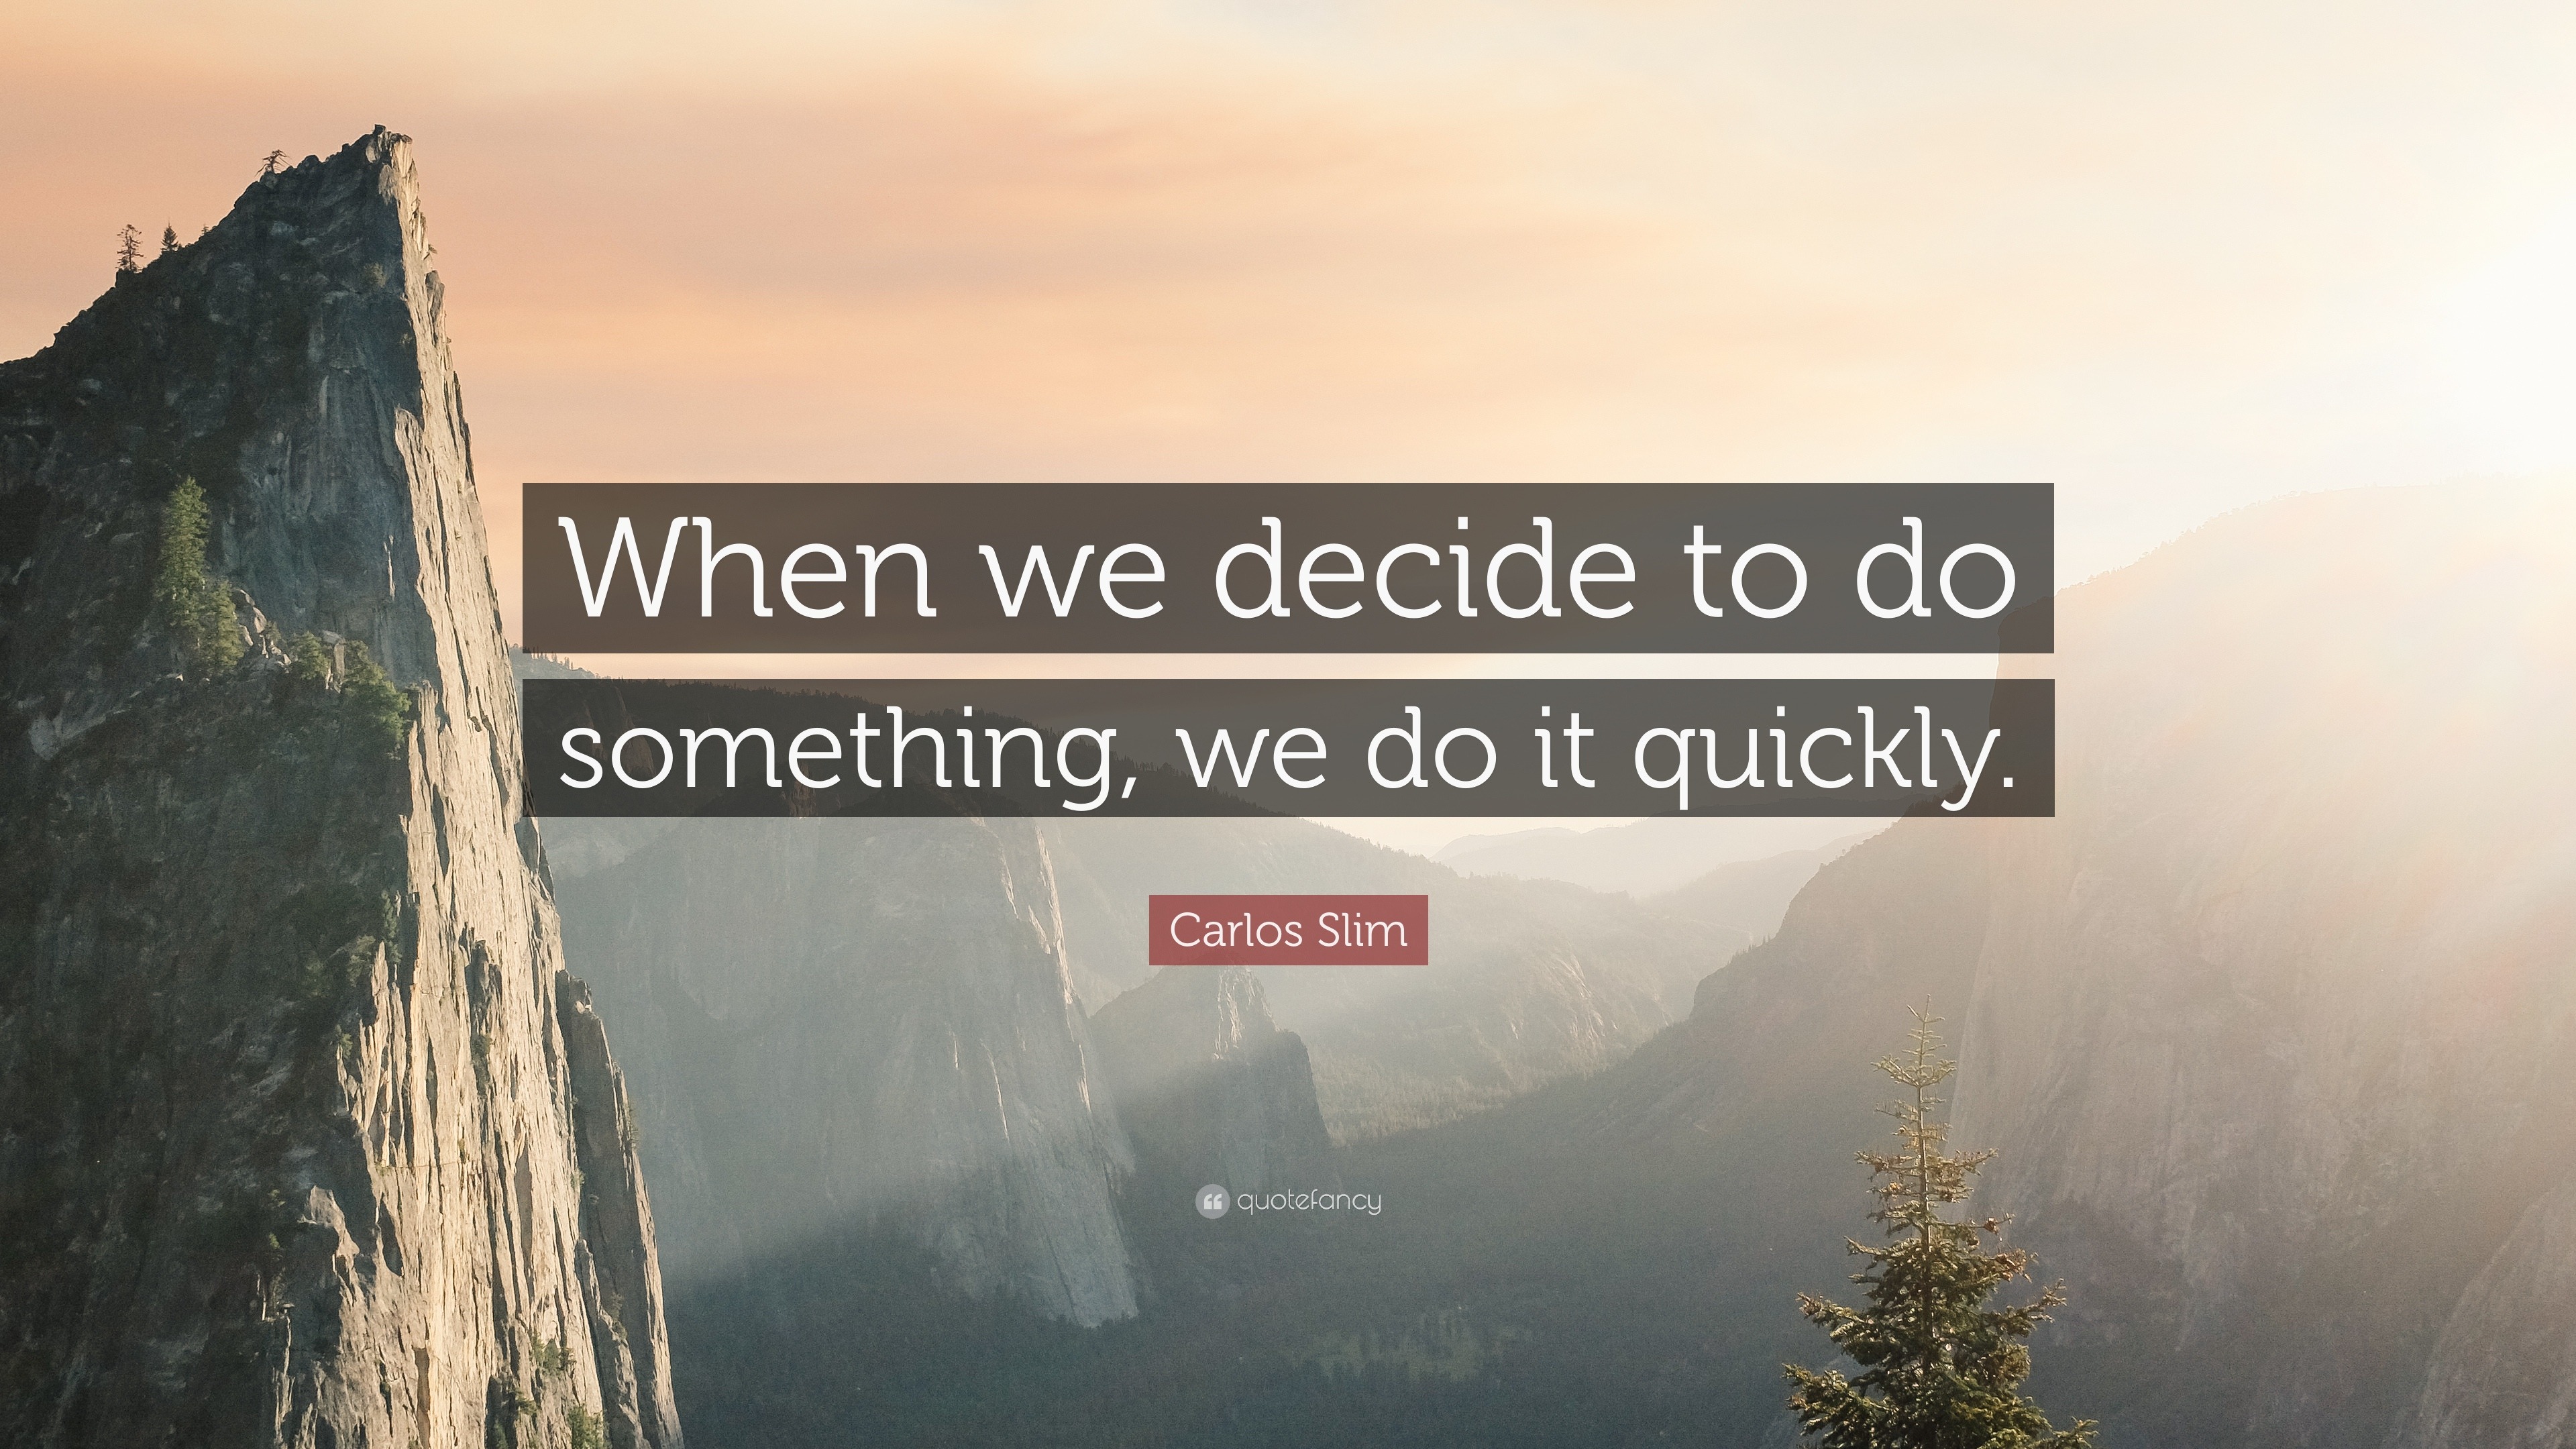 https://quotefancy.com/media/wallpaper/3840x2160/1183764-Carlos-Slim-Quote-When-we-decide-to-do-something-we-do-it-quickly.jpg